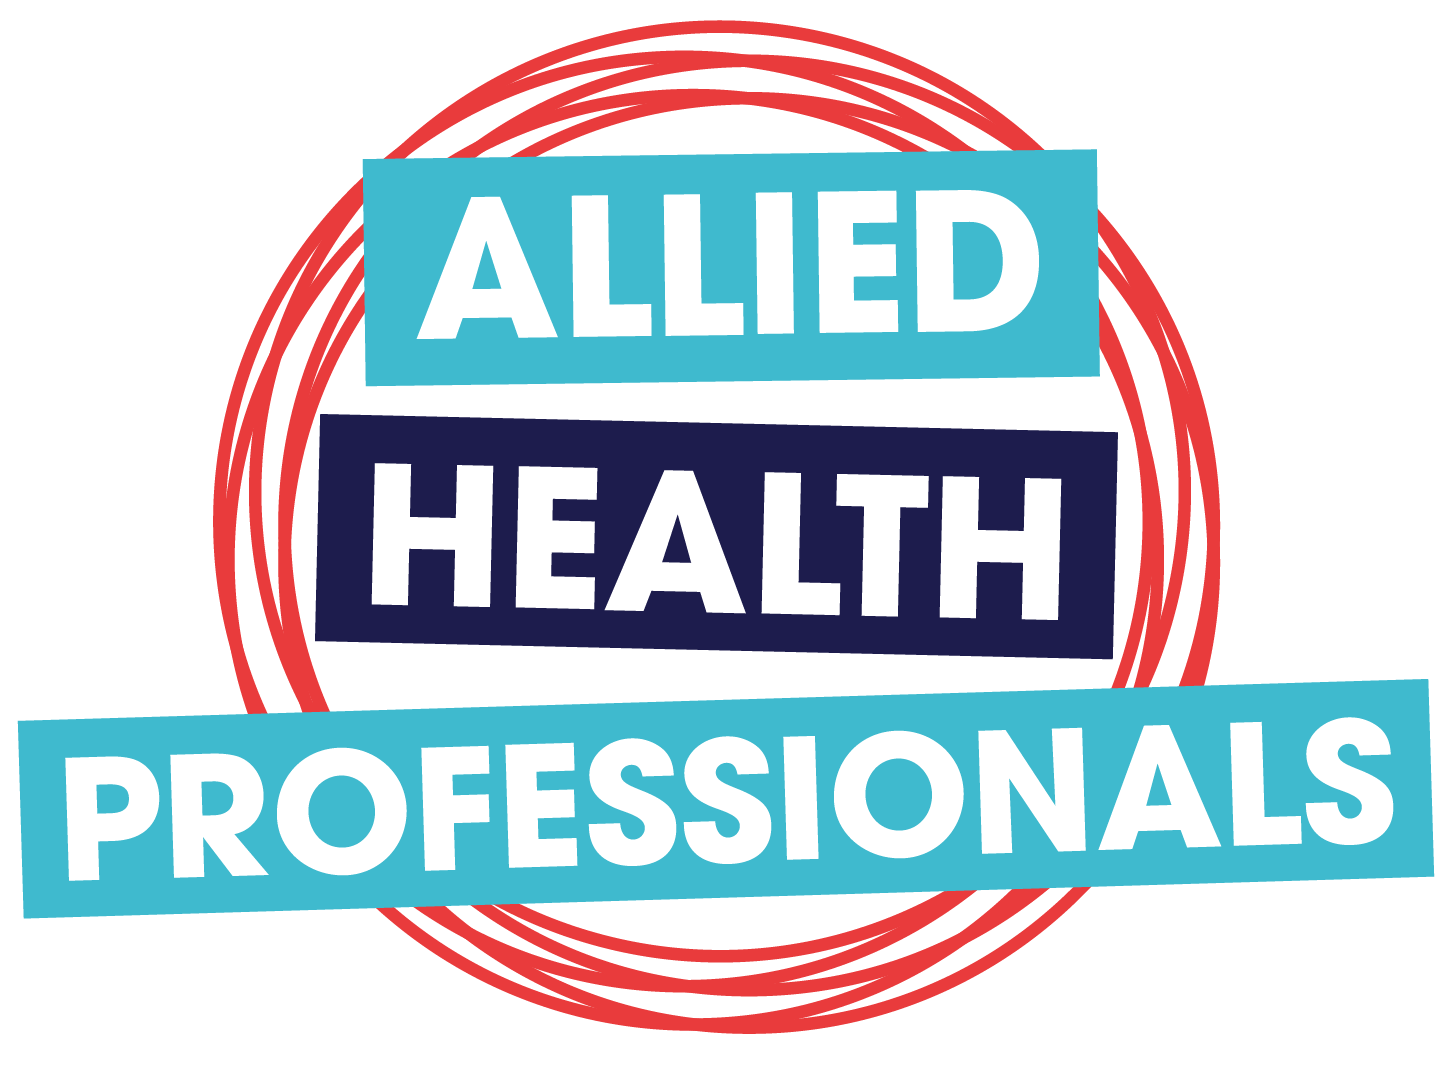 Allied Health Professionals (1)